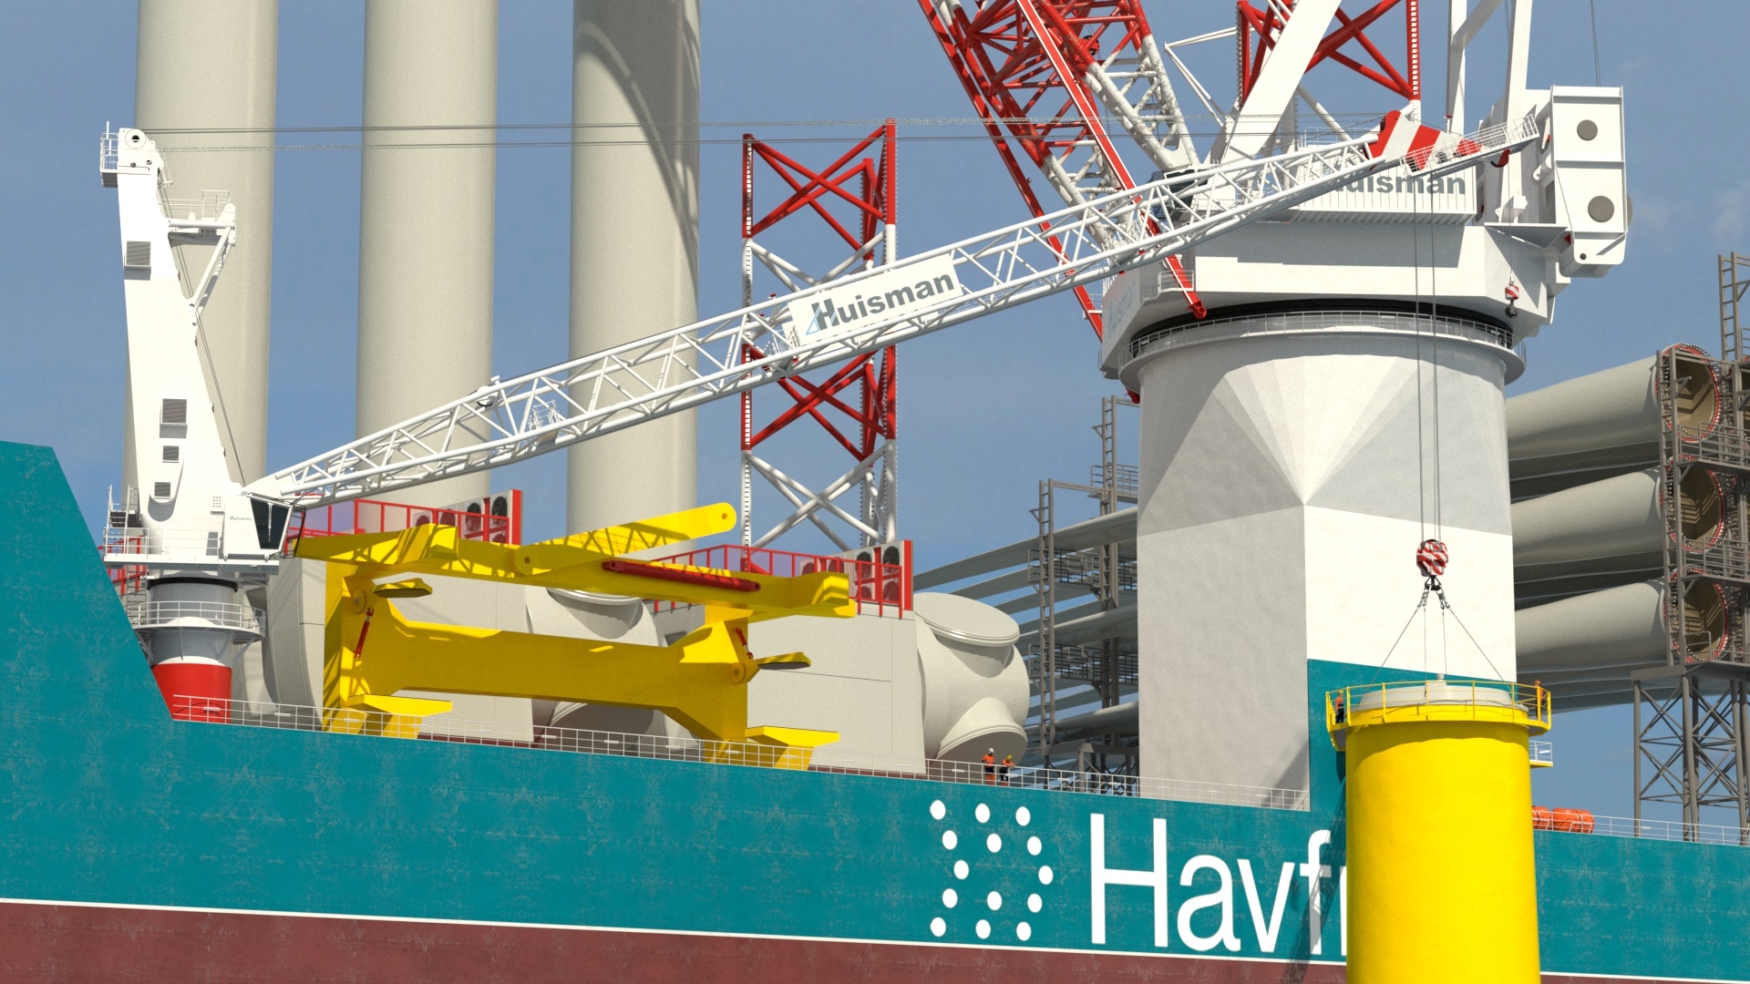 Huisman adds Auxiliary Crane packages to Havfram Wind orders